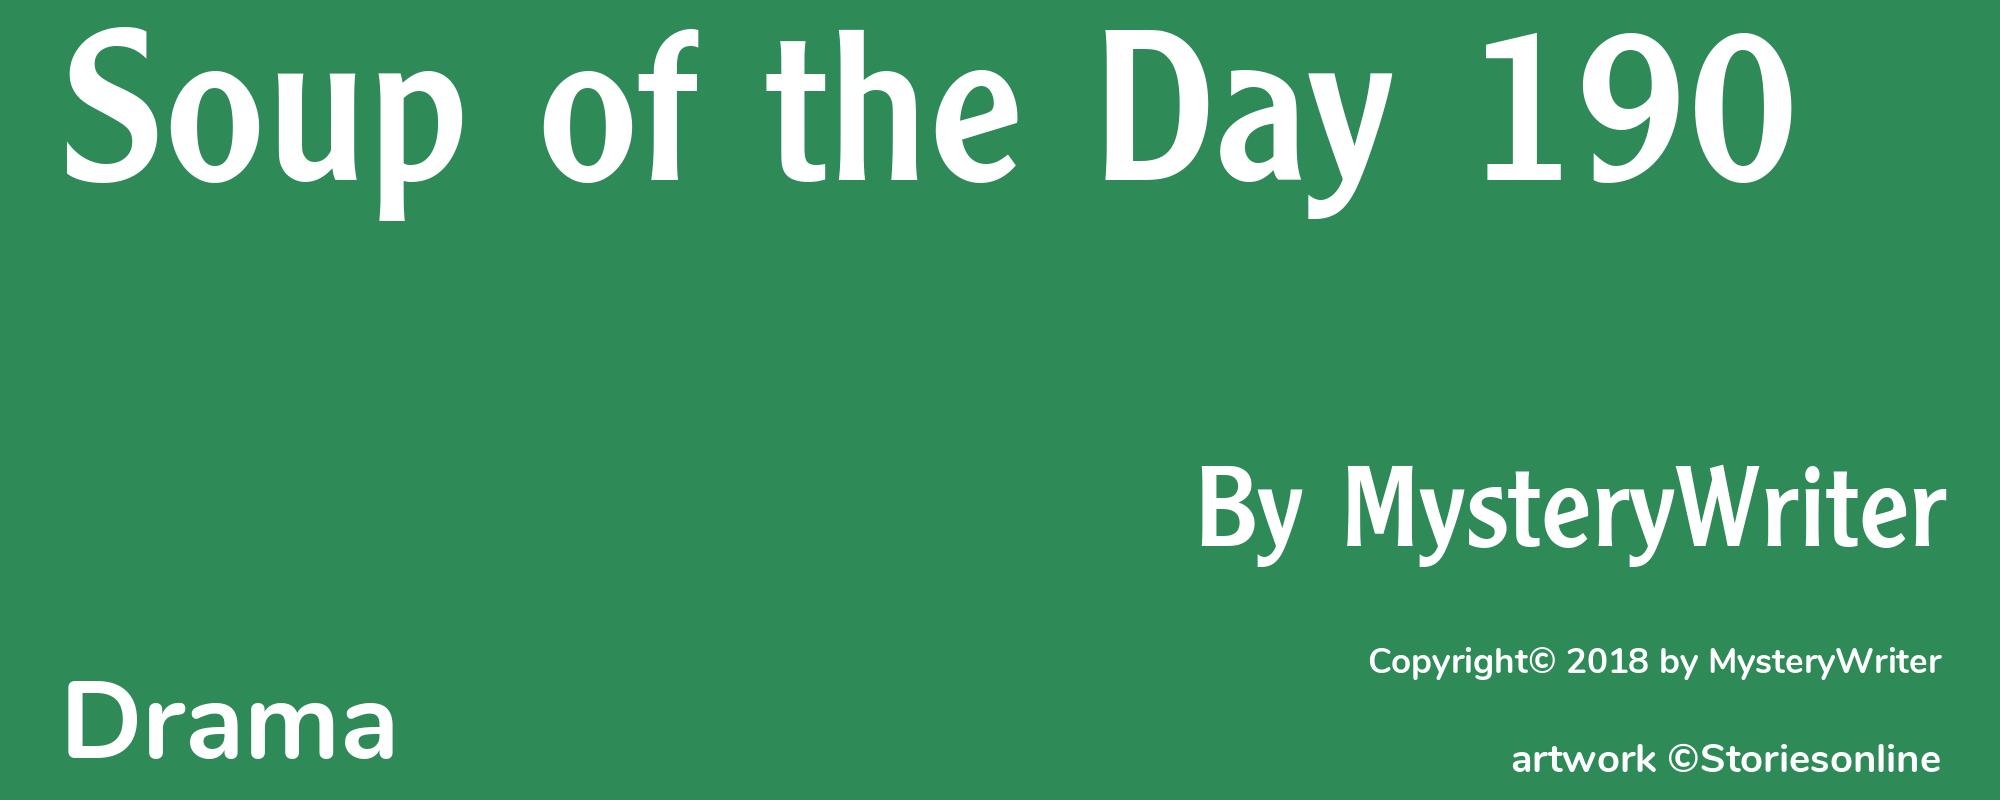 Soup of the Day 190 - Cover